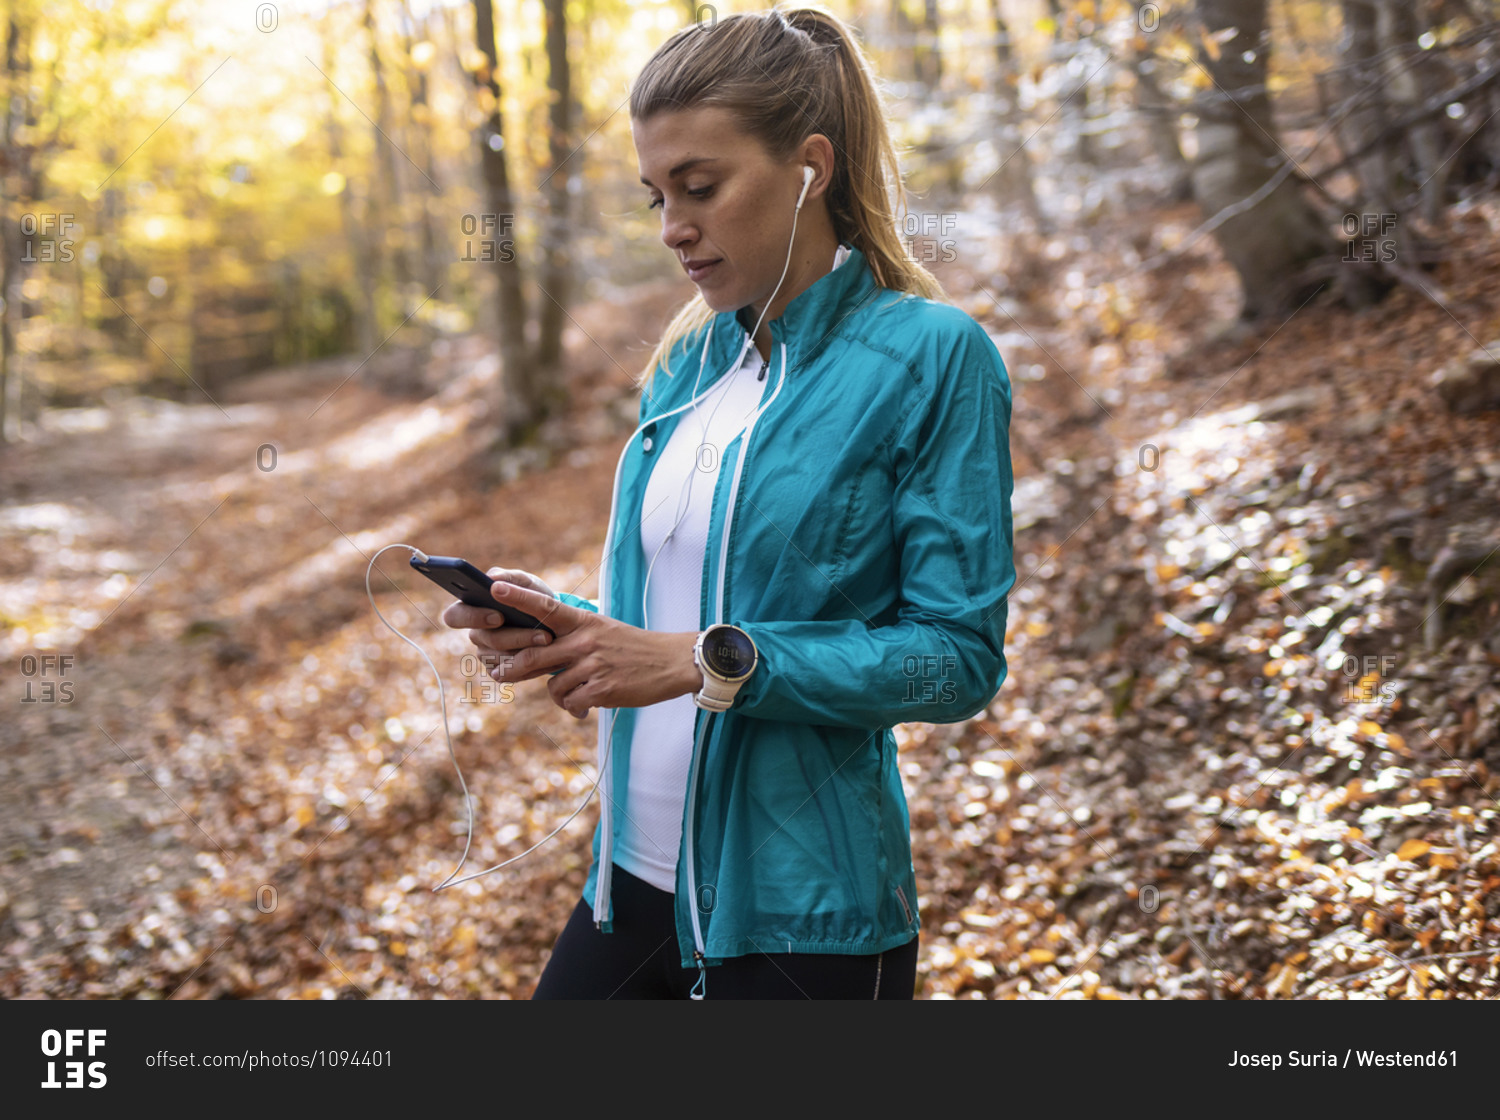 Sportswoman with in-ear headphones using mobile phone while standing in forest